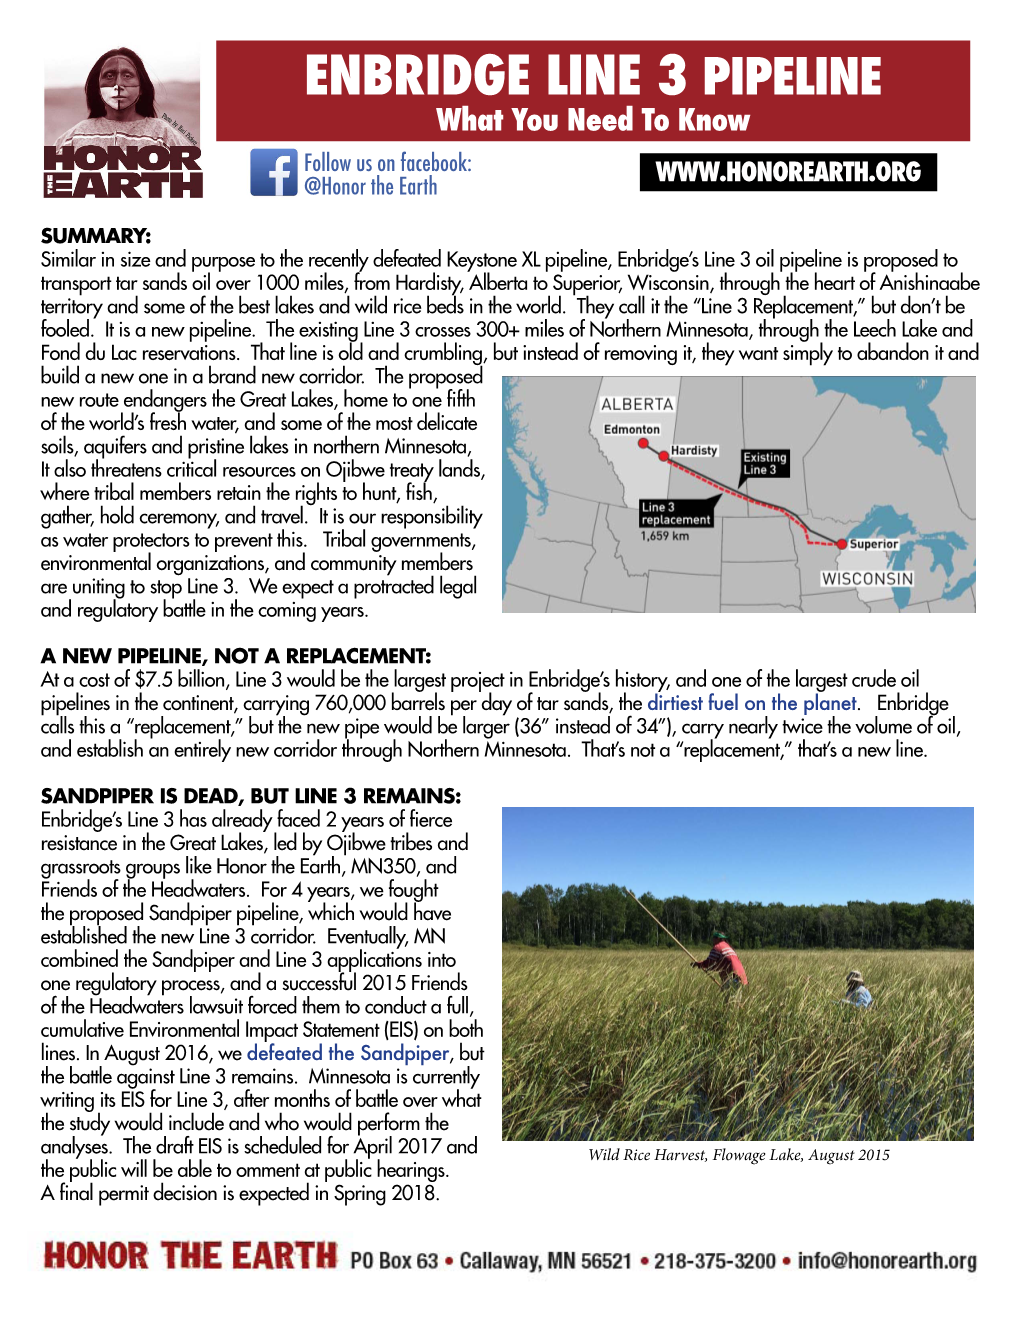 ENBRIDGE LINE 3 PIPELINE What You Need to Know Follow Us on Facebook: @Honor the Earth